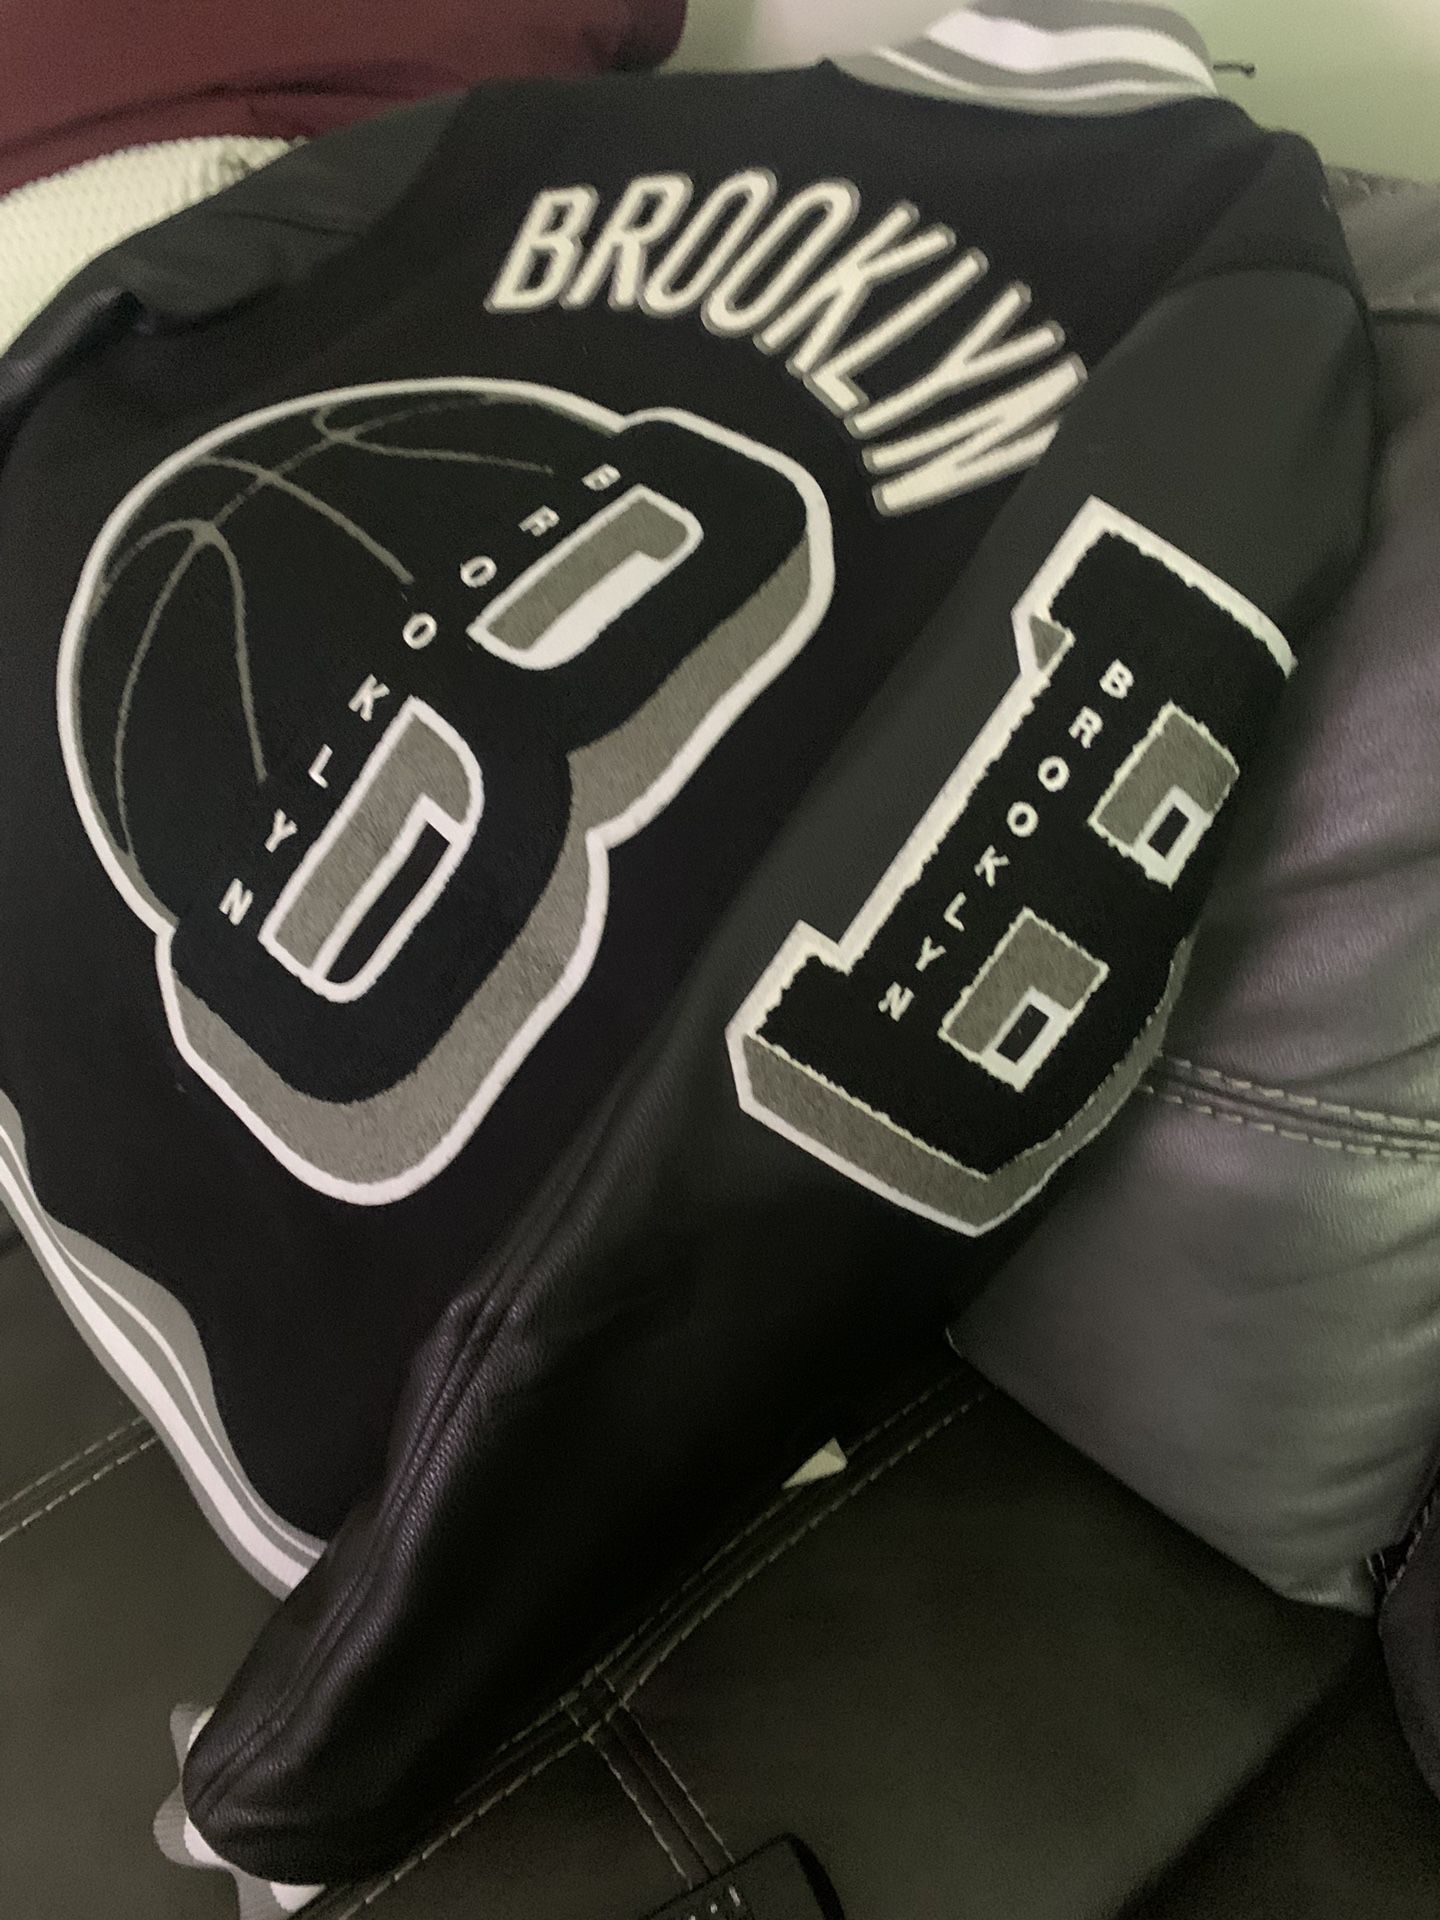 Brooklyn Nets Bomber Jacket $175 for Sale in New York, NY - OfferUp